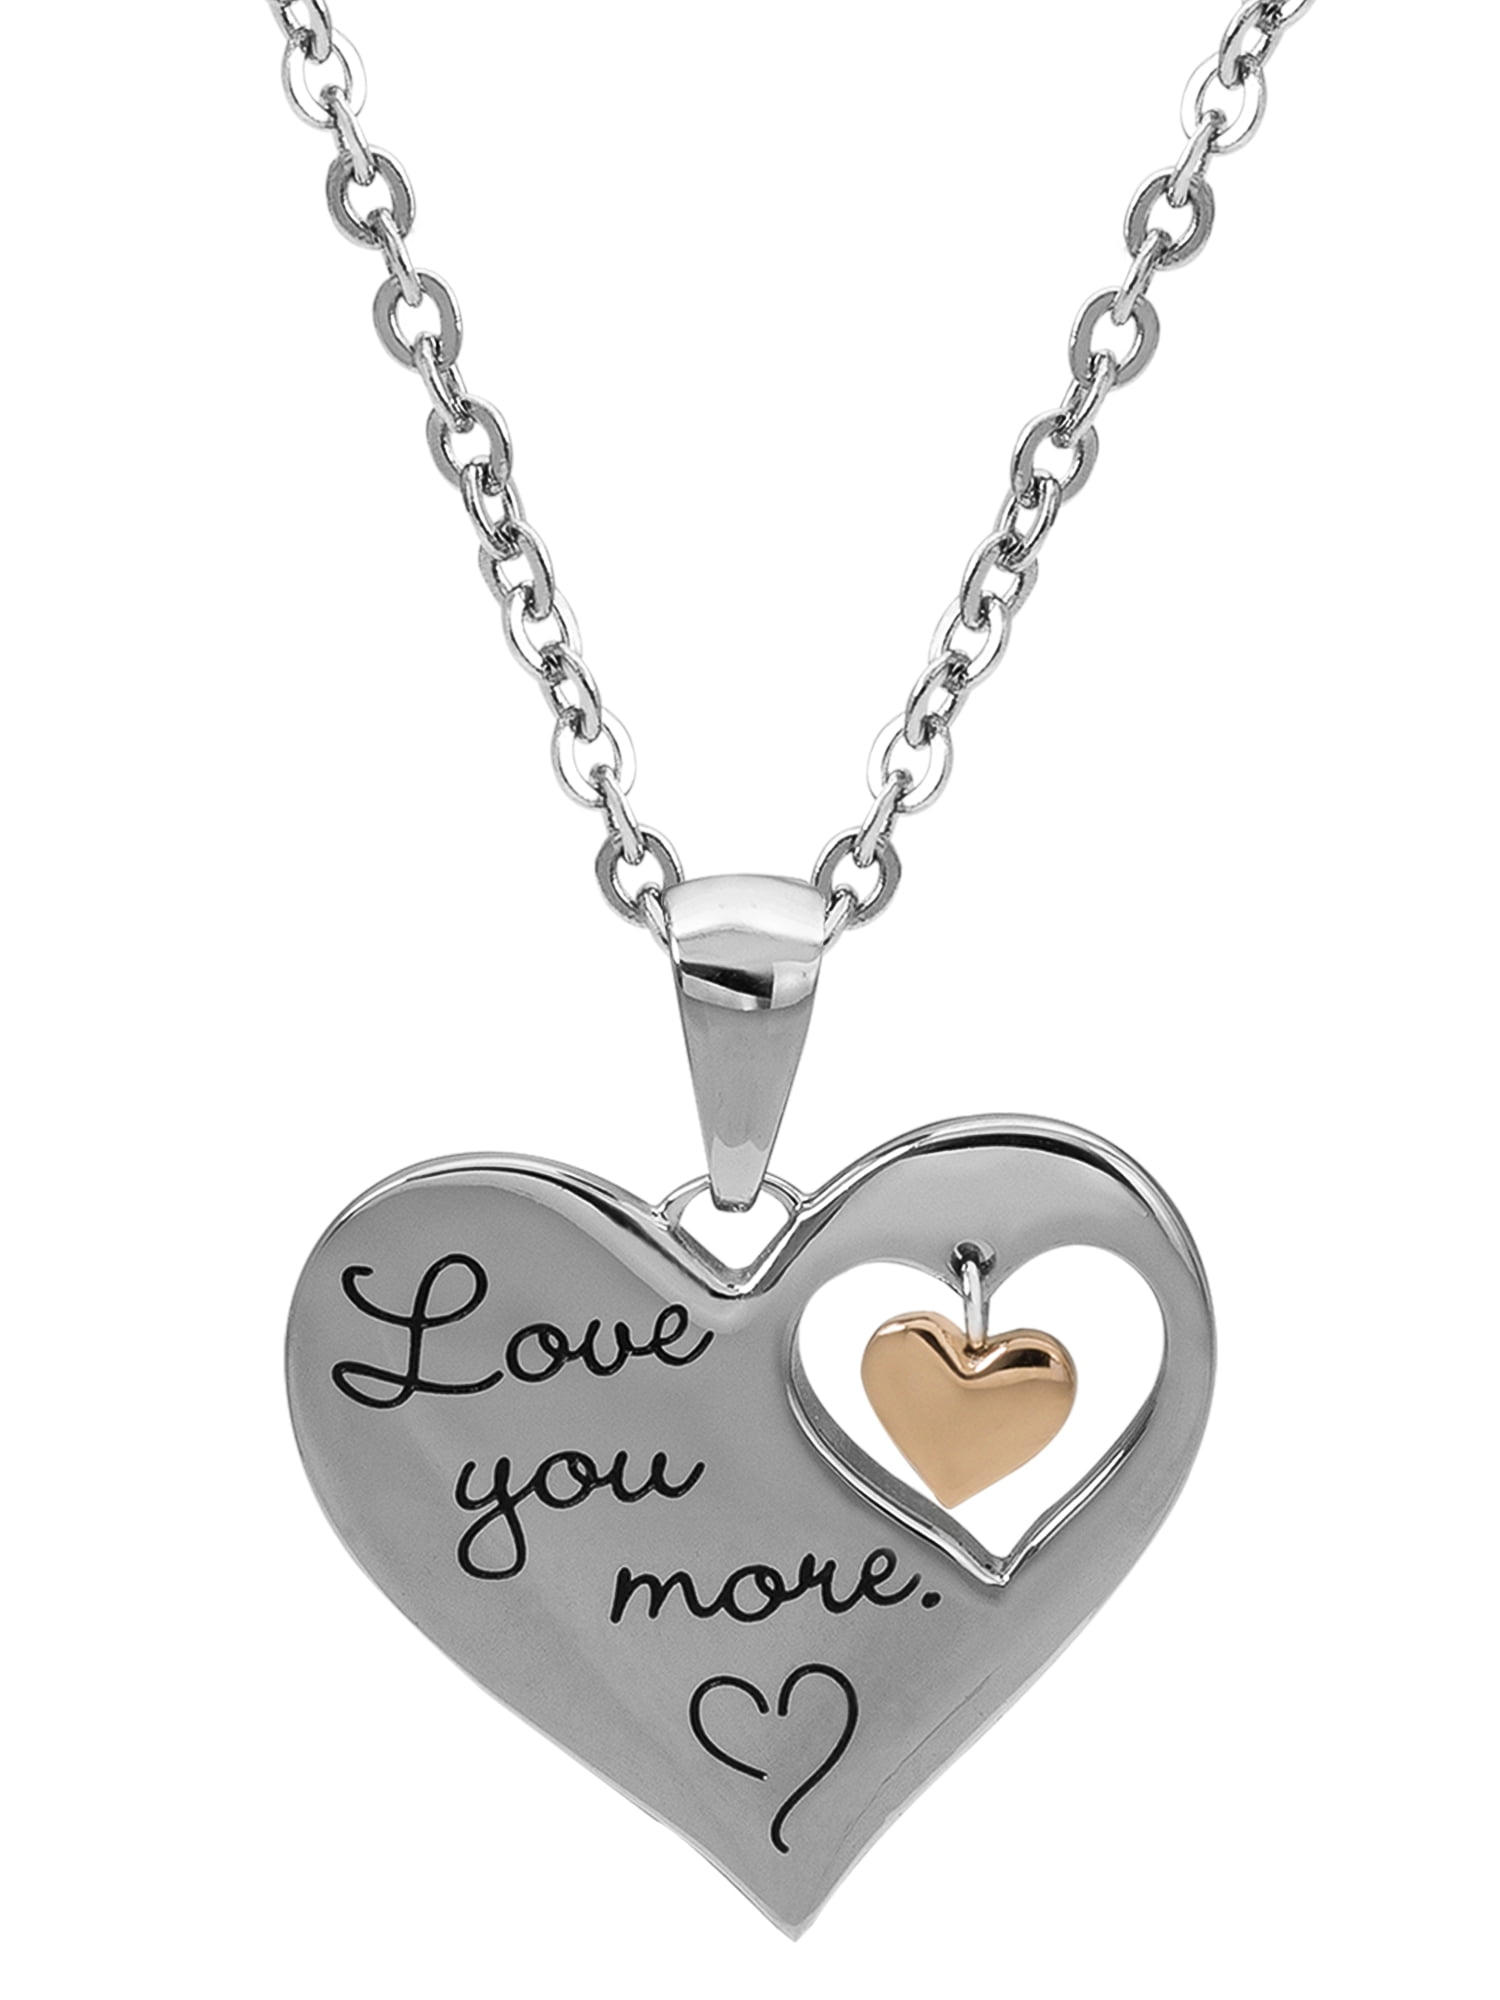 Connections from Hallmark Stainless Steel I Love You More Dangle Heart Pendant 18 5669ffe5 c224 4800 a417 b65f40eb8646 1.c46326c6b8491b58b40bfa742dc7cbba